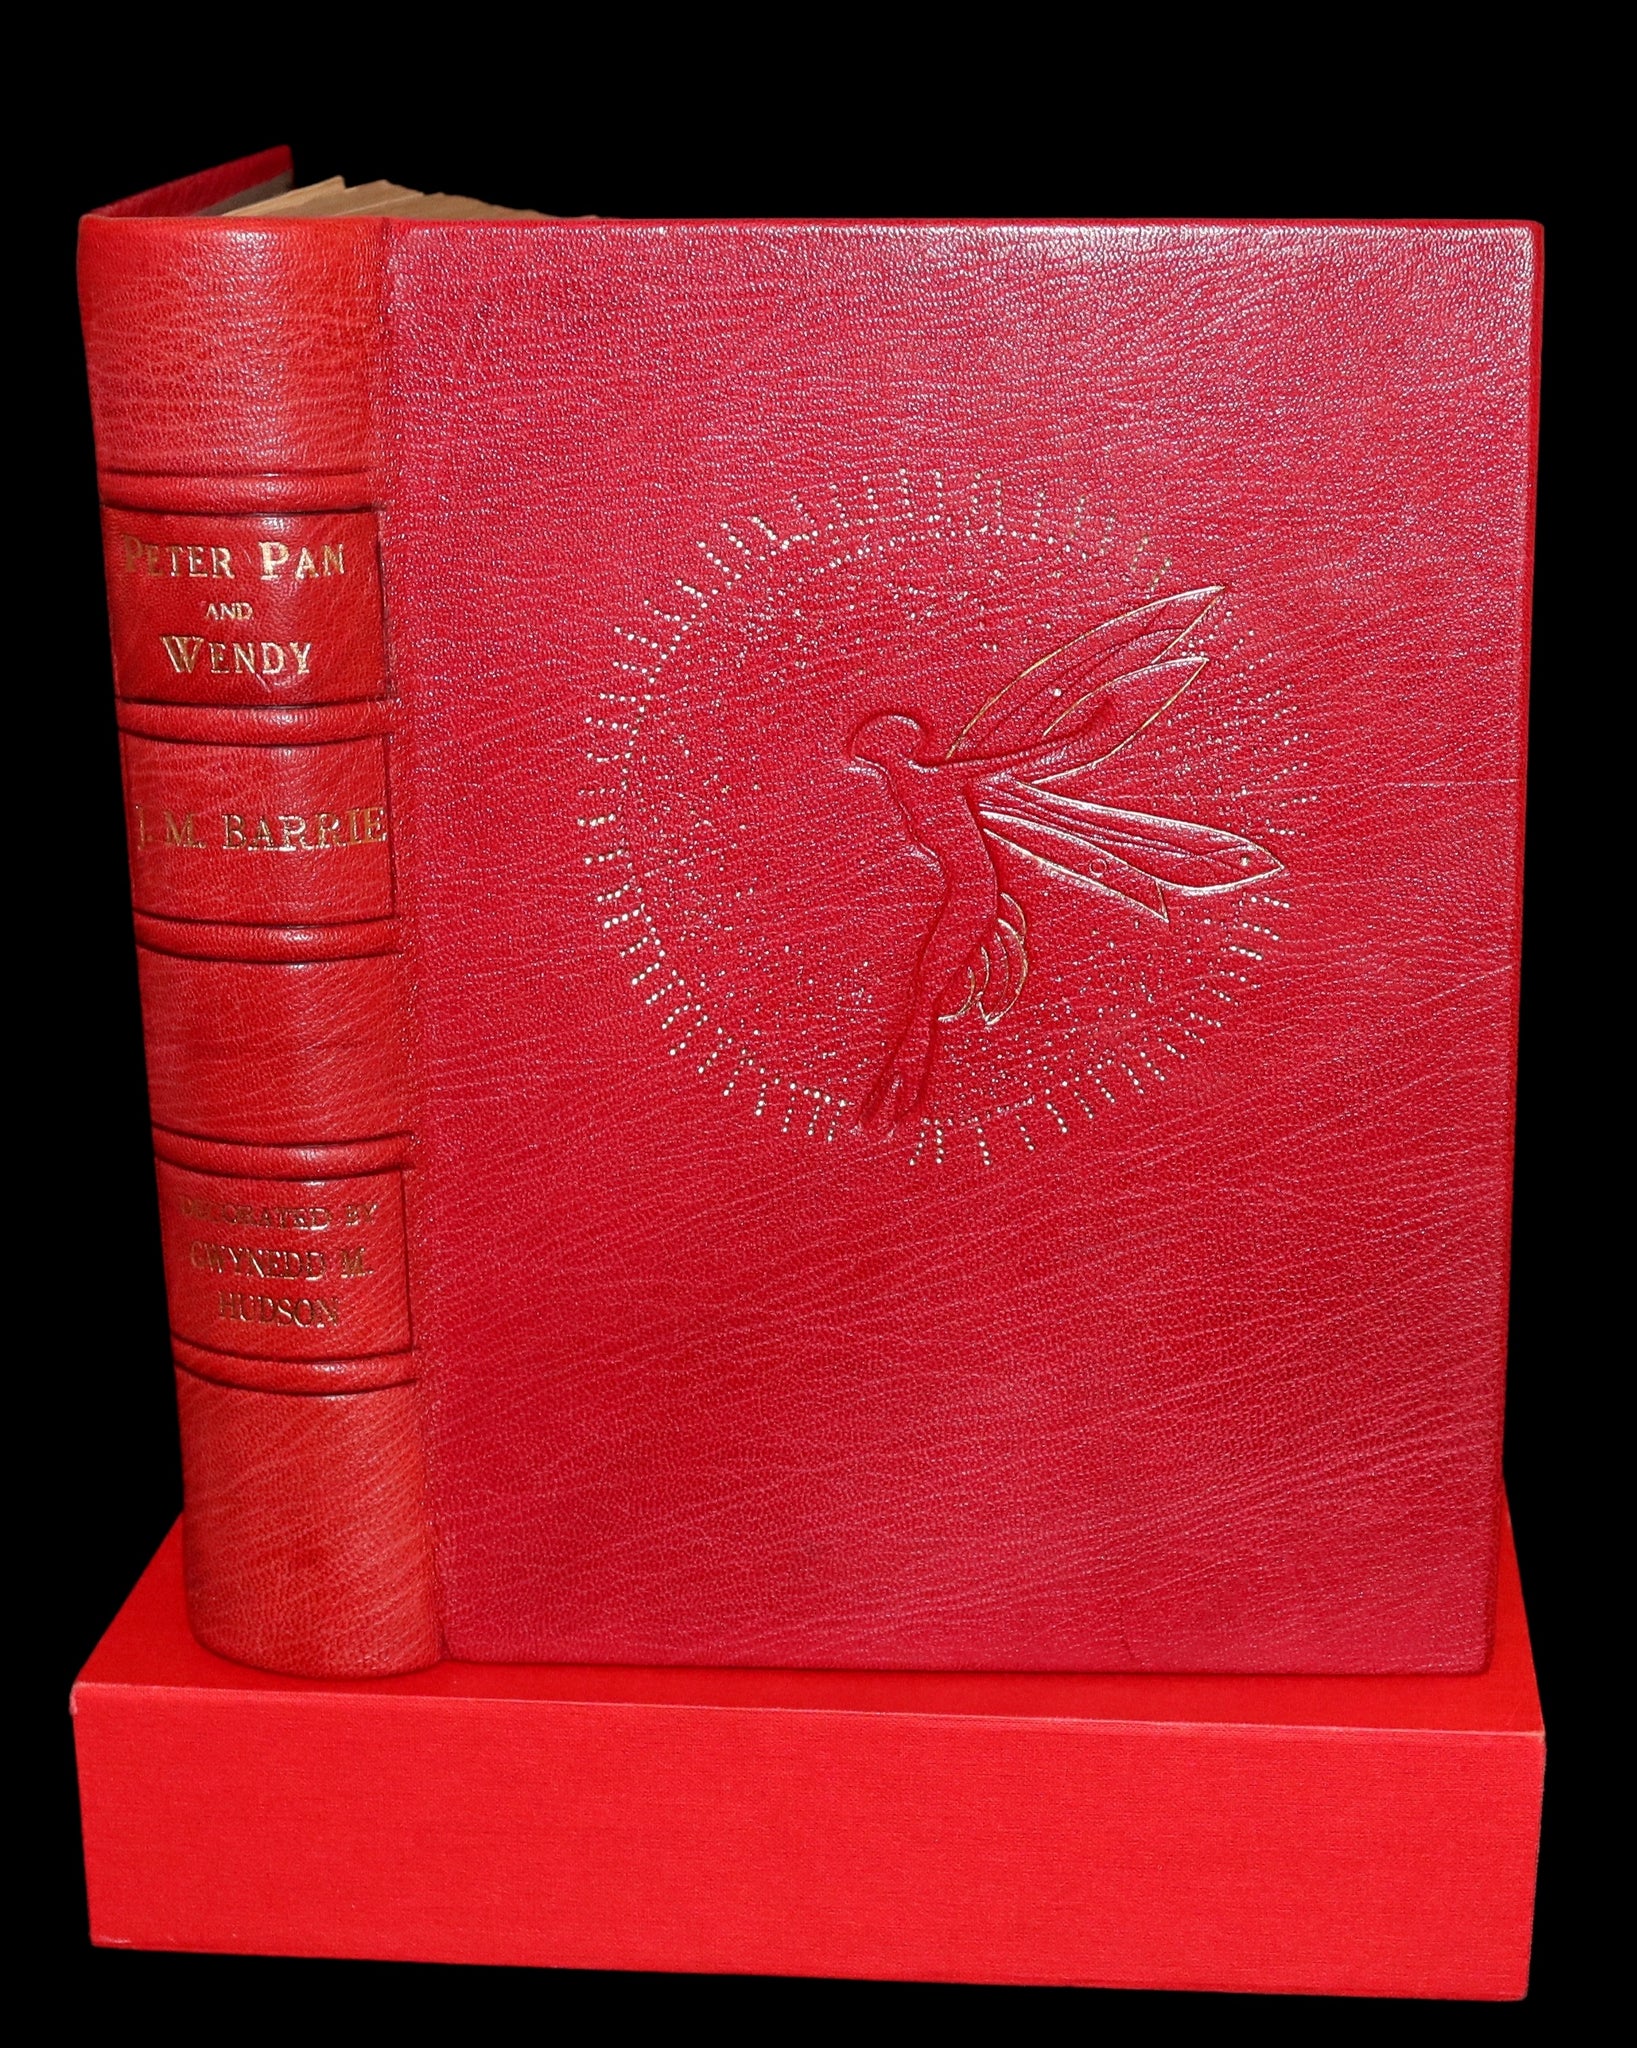 1931 Exquisite Book bound by P. Doyle - Peter Pan & Wendy. First Illustrated Edition by Gwynedd Hudson.